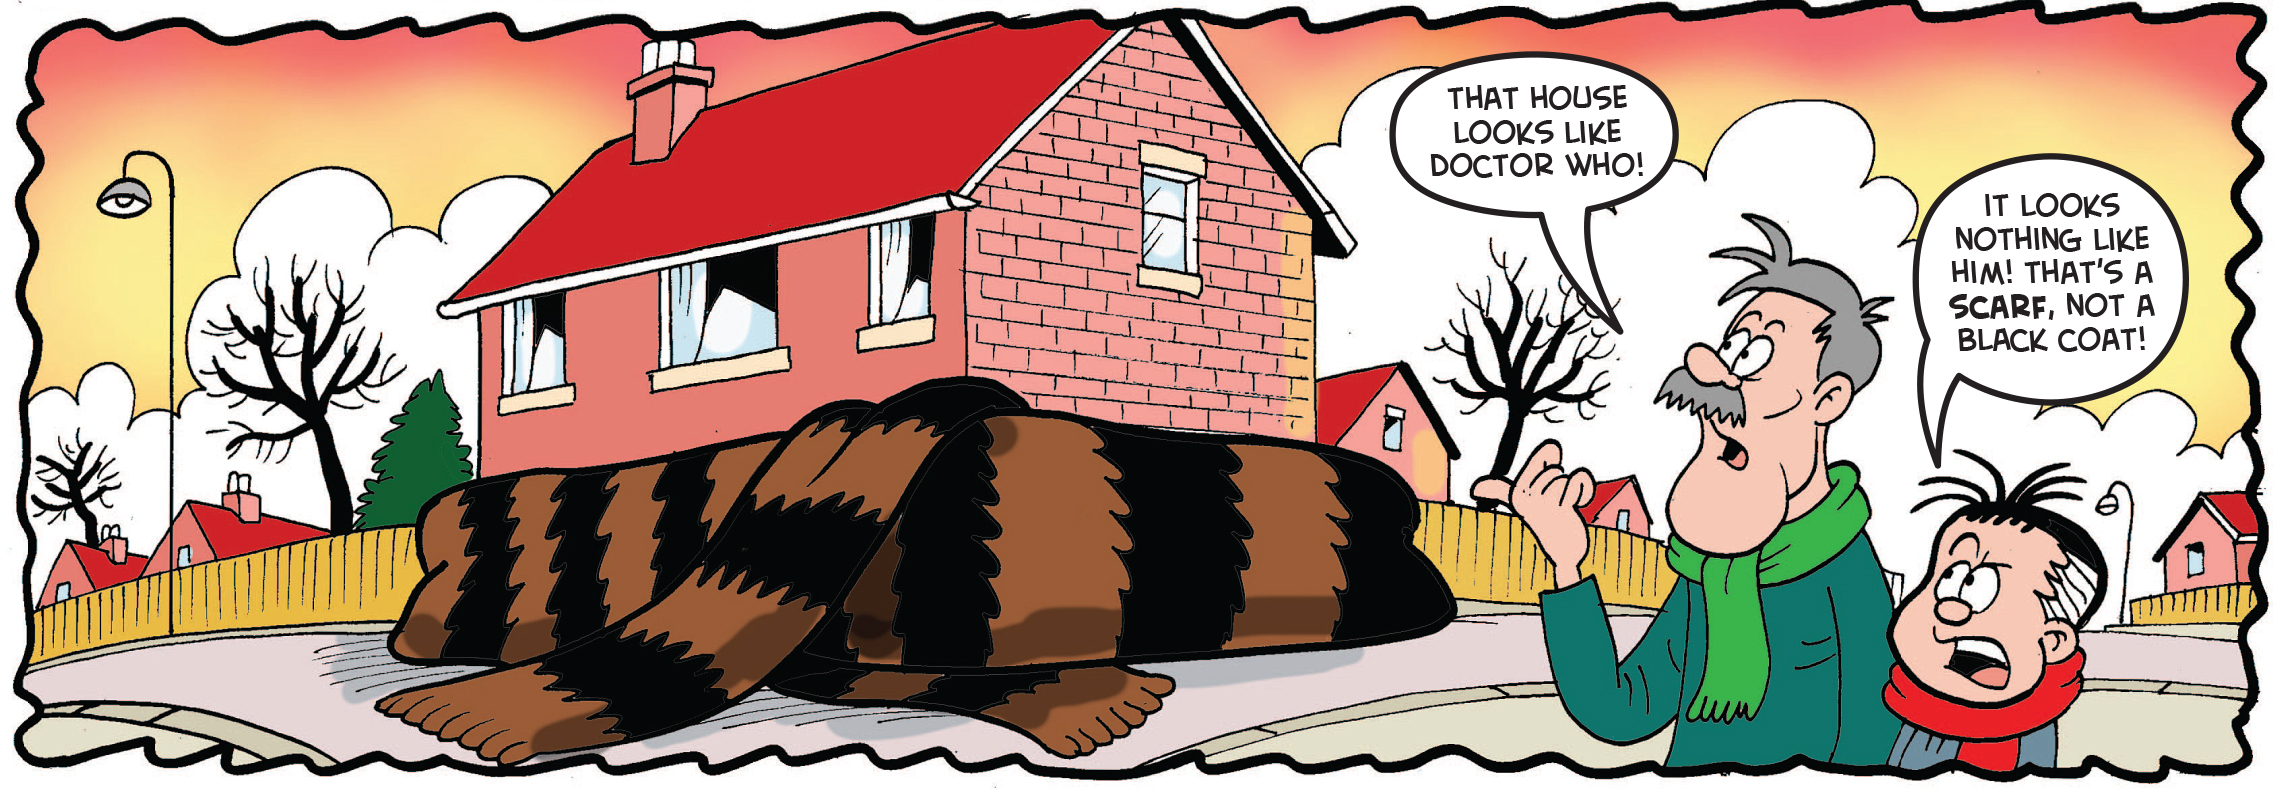 The house is wrapped in a mammoth-hair scarf